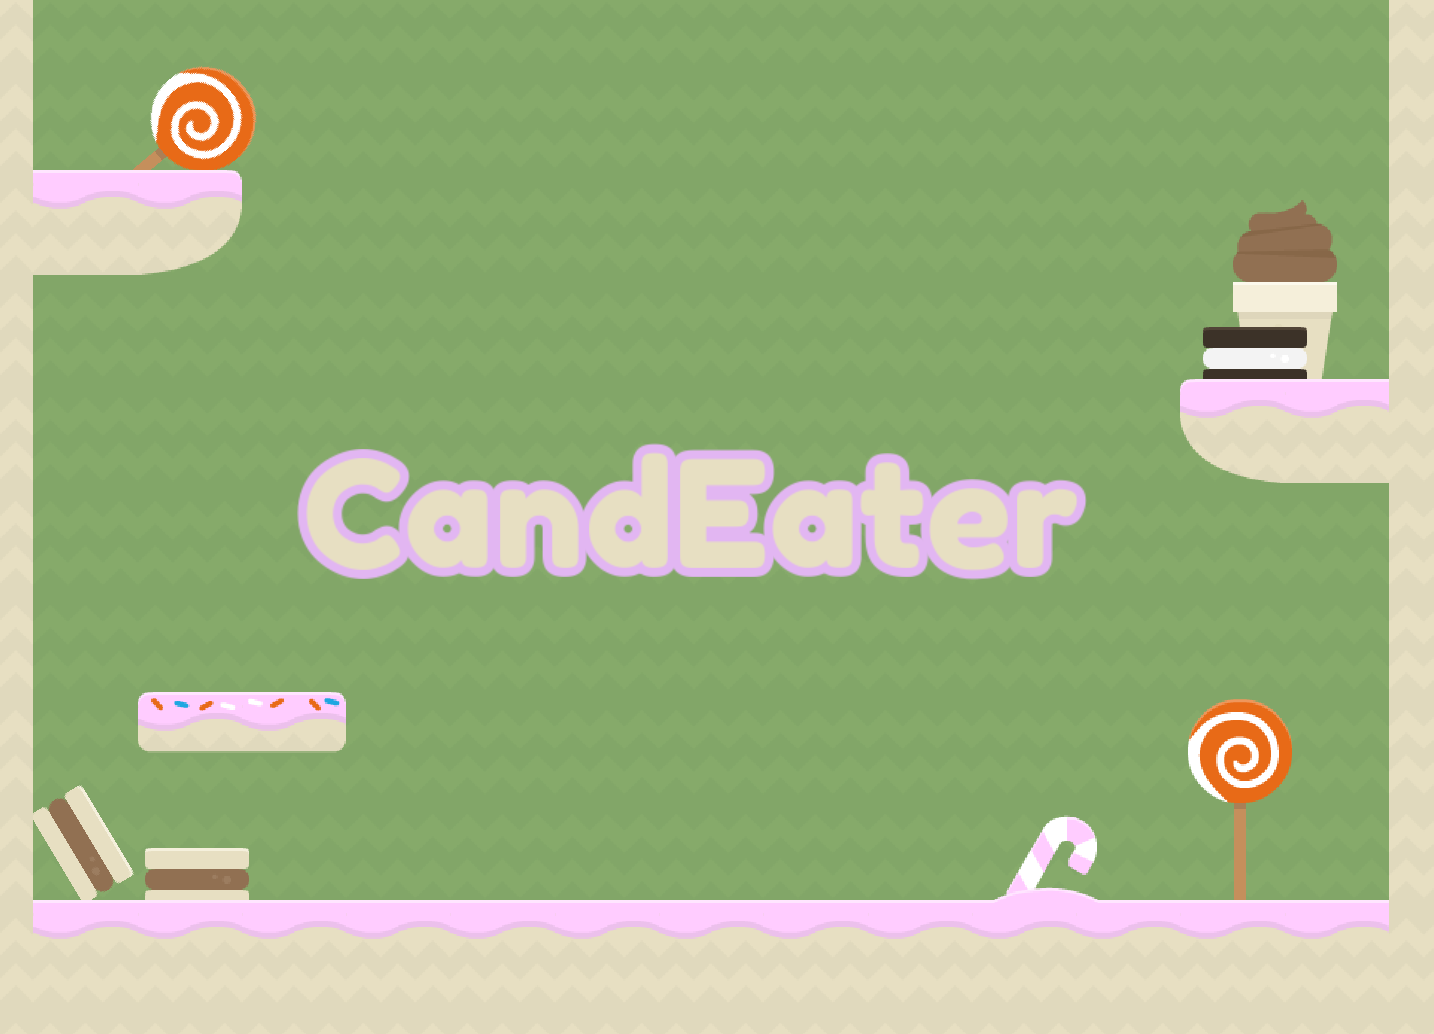 CandEater